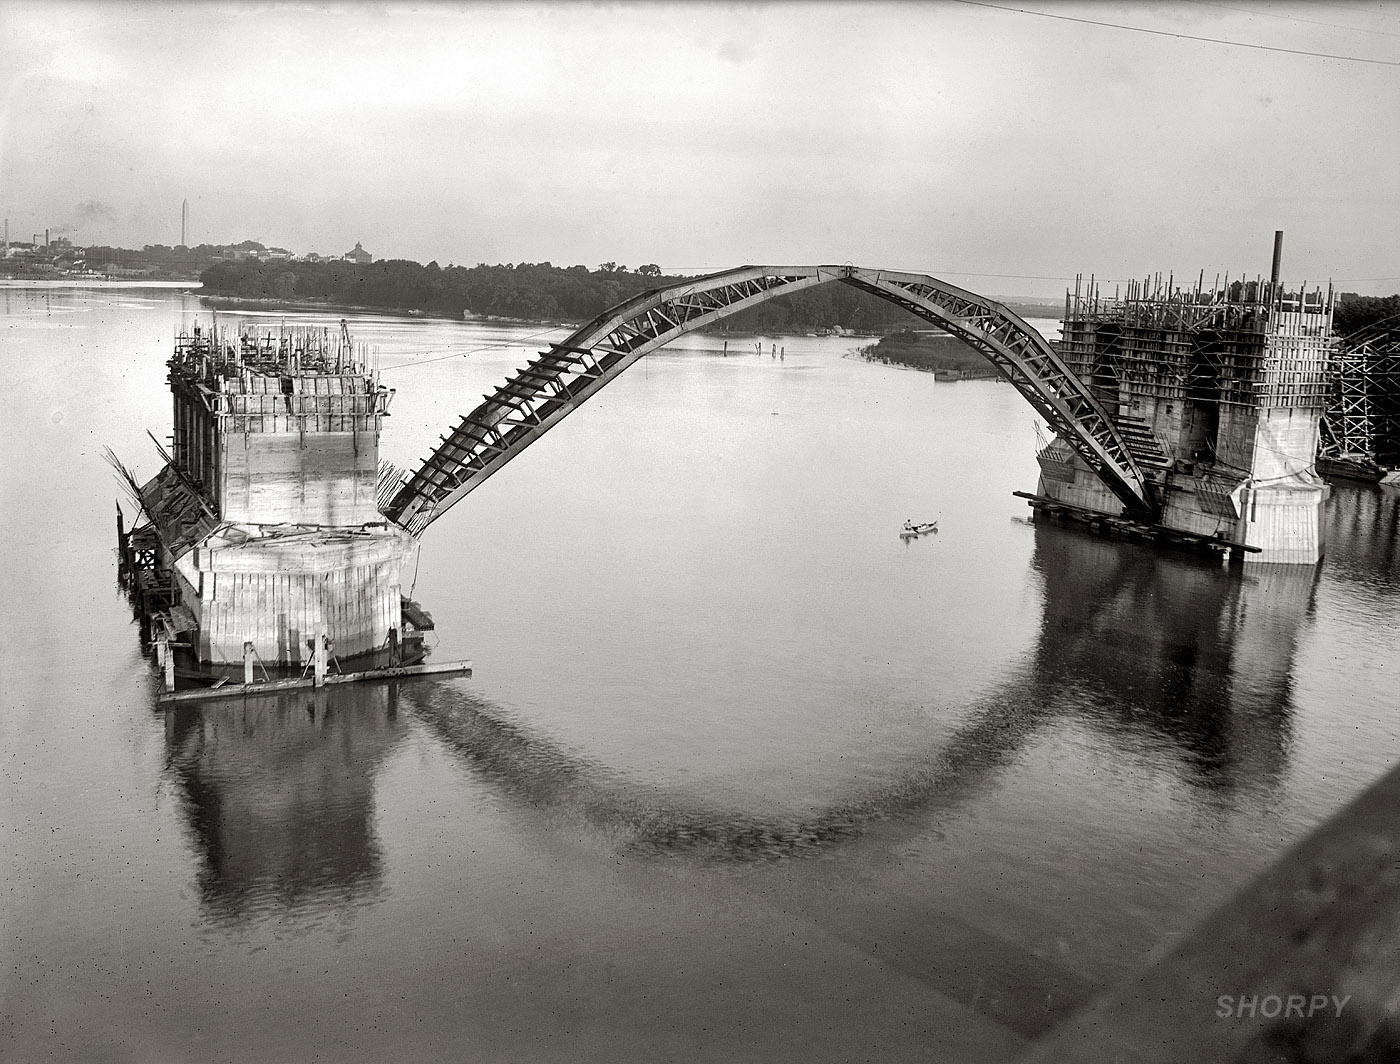 The Francis Scott Key Bridge over the Potomac under construction circa 1920. View full size. National Photo Company Collection glass negative.